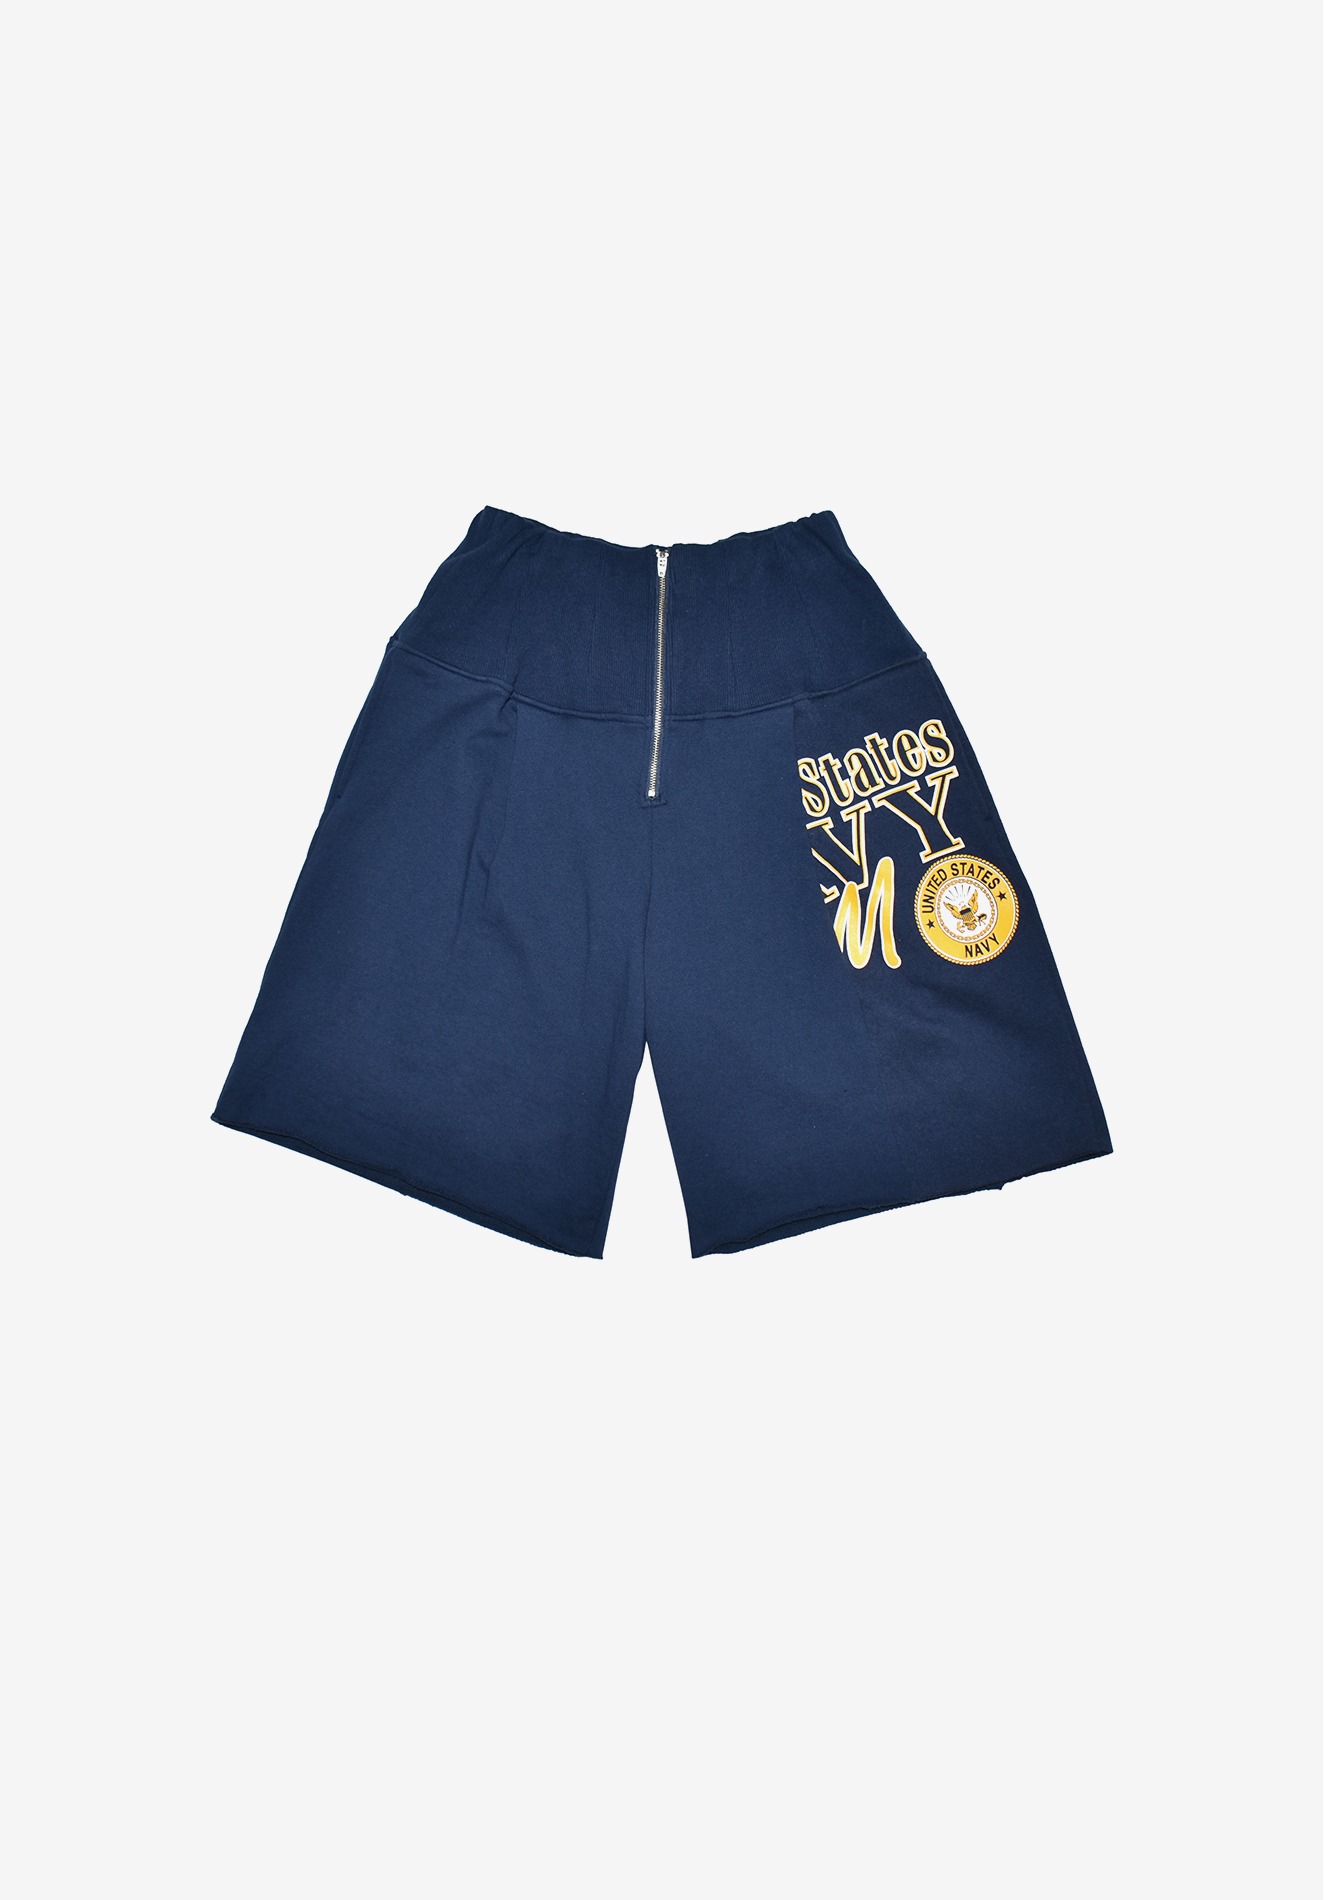 [ONLY OFFLINE STORE] circa make cutback wide sweat boxer shorts, NAVY